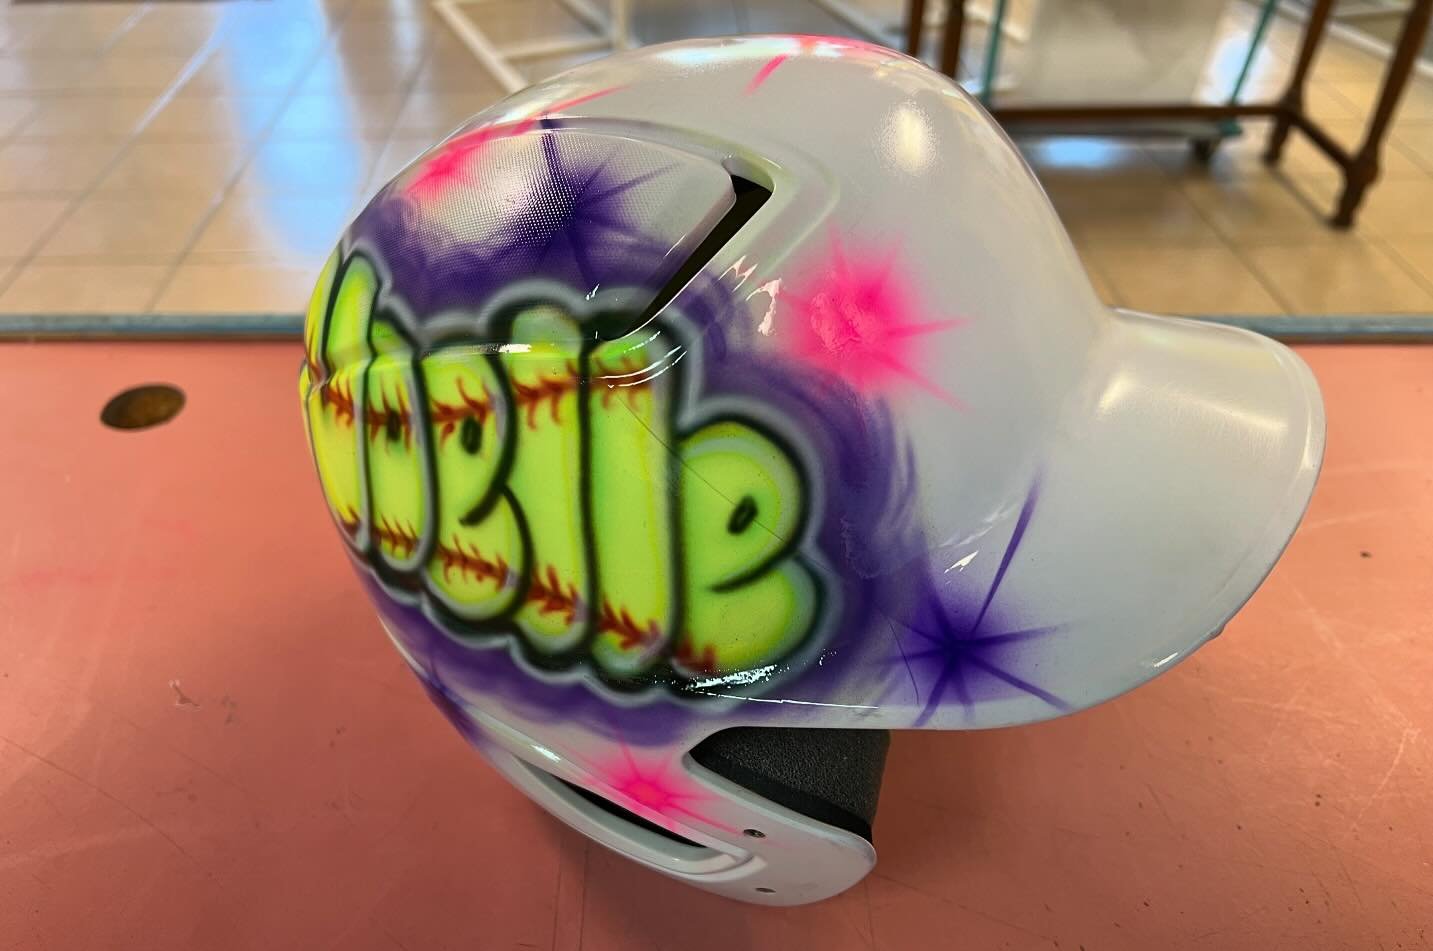 Custom helmets by our artist Hanna are perfect for the softball/baseball player in your family. Get them now before the season is over.
.
.

#airbrush #airbrushart #airbrushedtshirts #tshirts #artists #cincinnati #softball #baseball #softballhelmets 